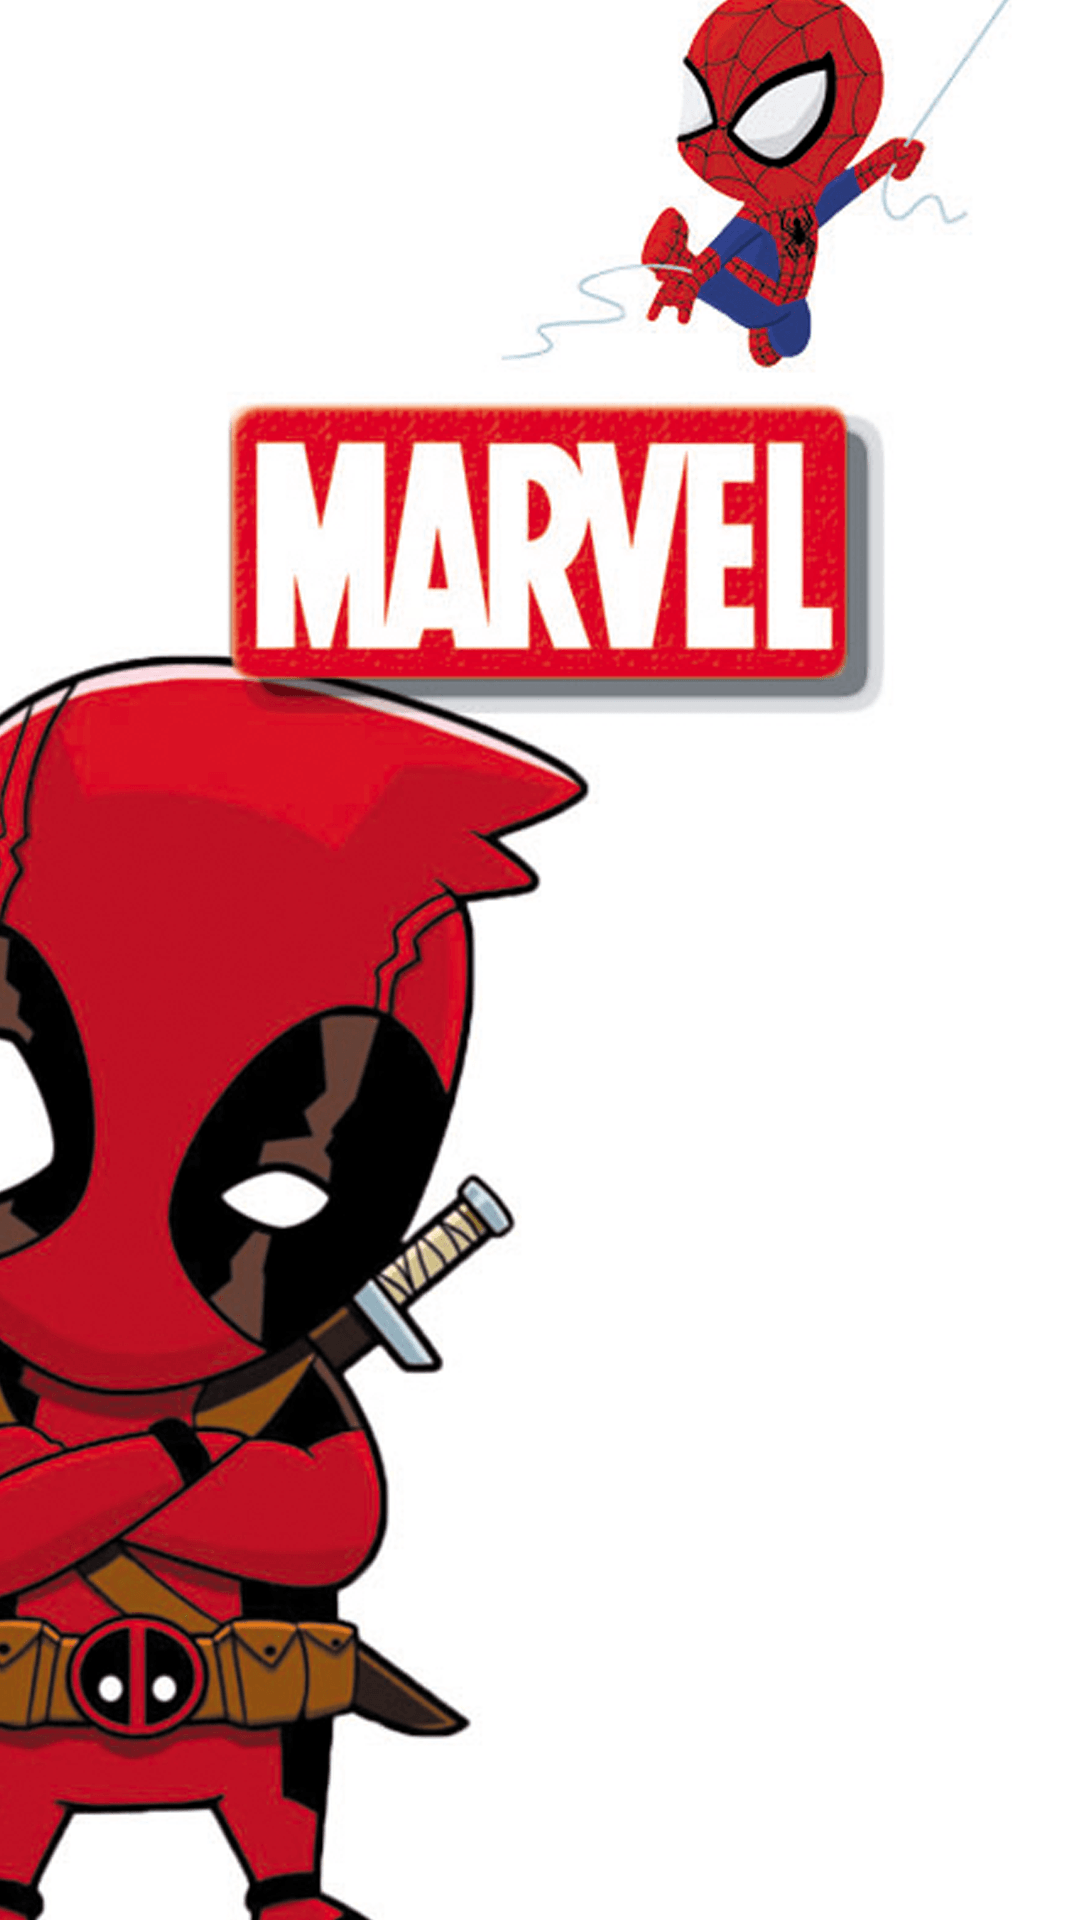 AWESOME CARTOON MARVEL WALLPAPER IN YOUR PHONE !!!